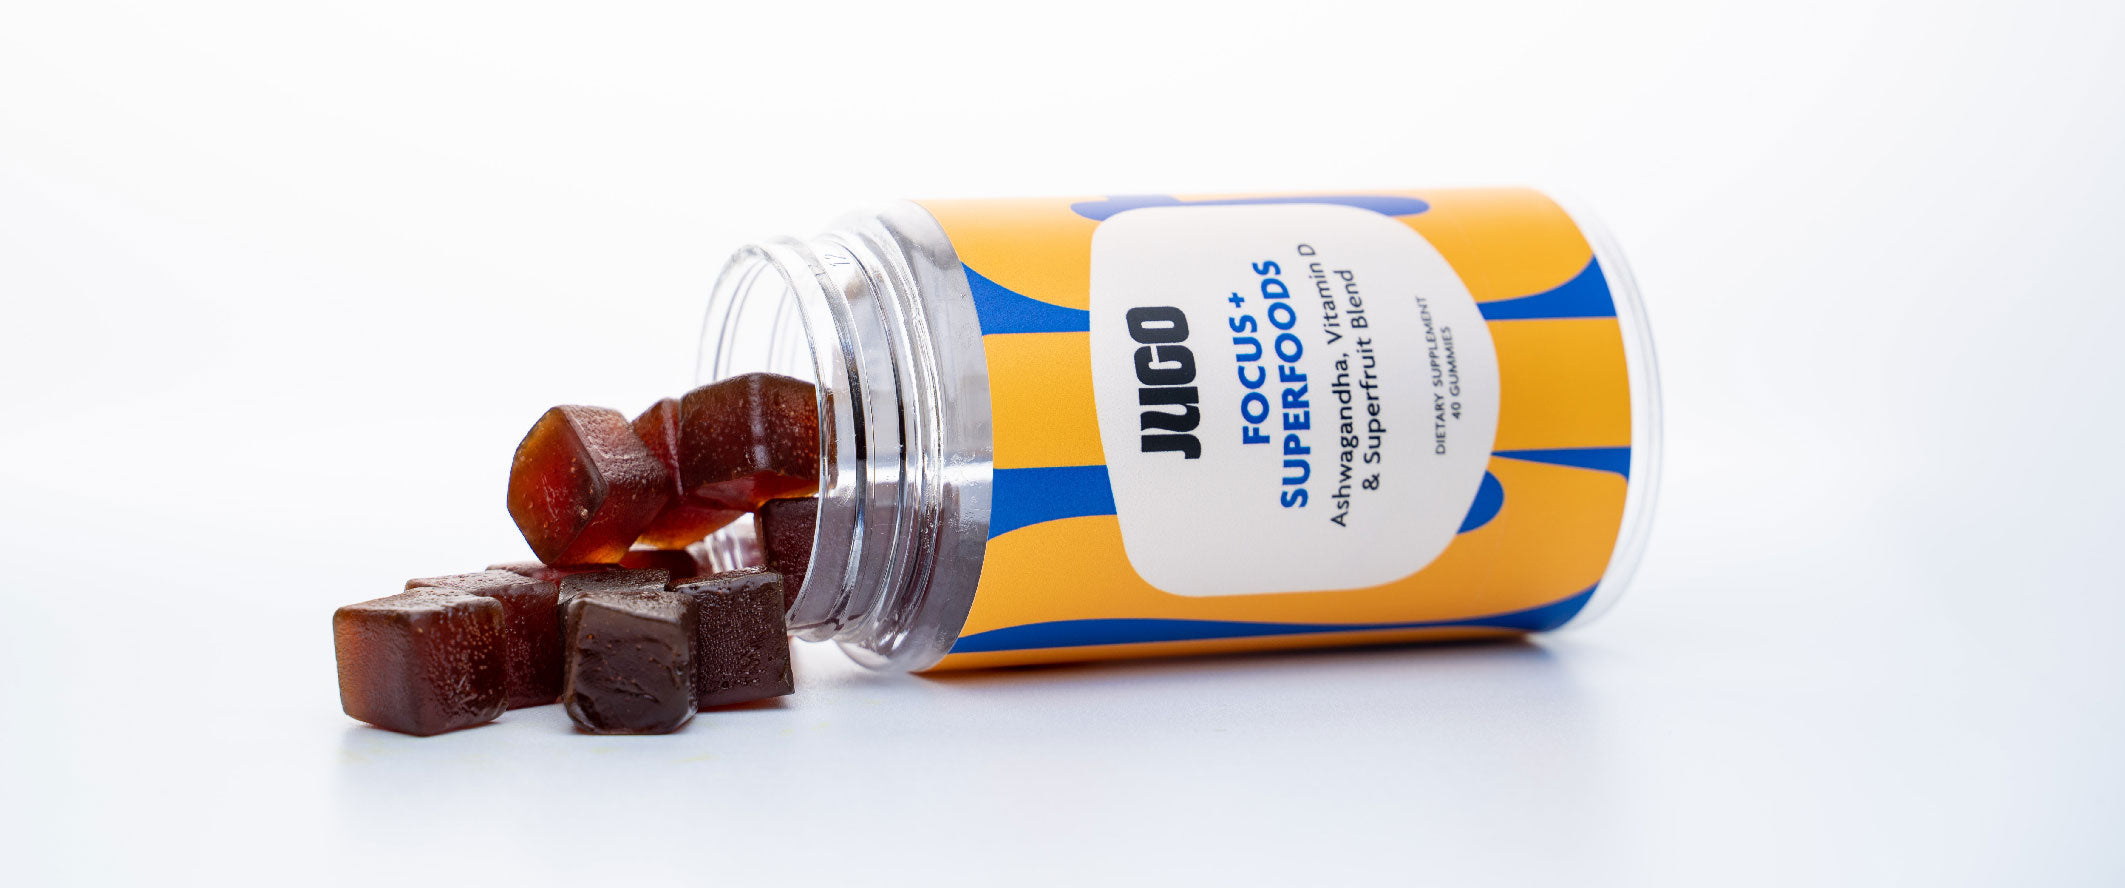 Focus gummies made with superfoods